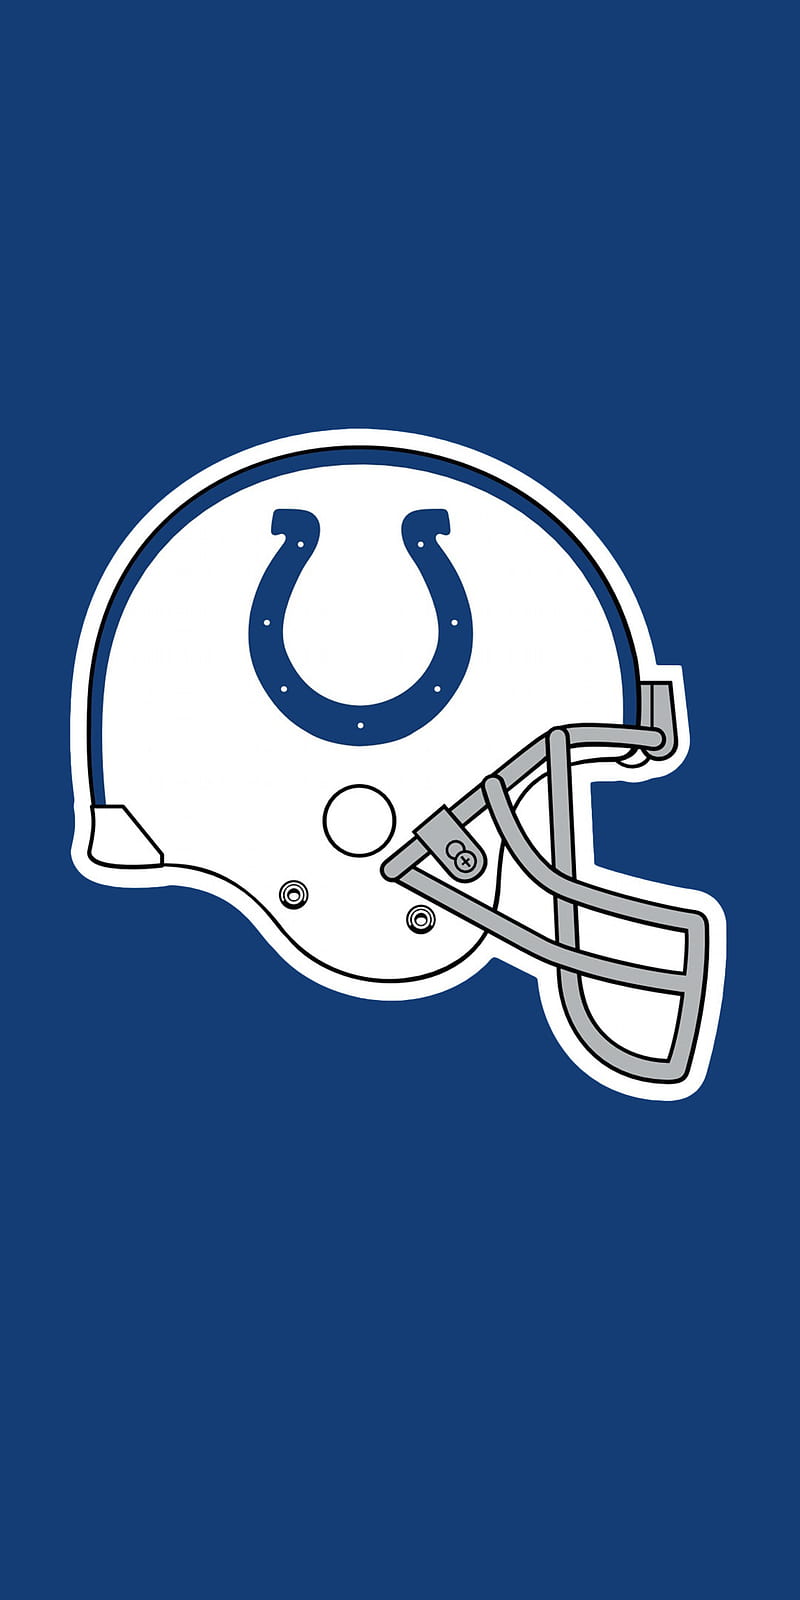 Indianapolis Colts, 929, colts, cool, football indianapolis, new, nfl ...